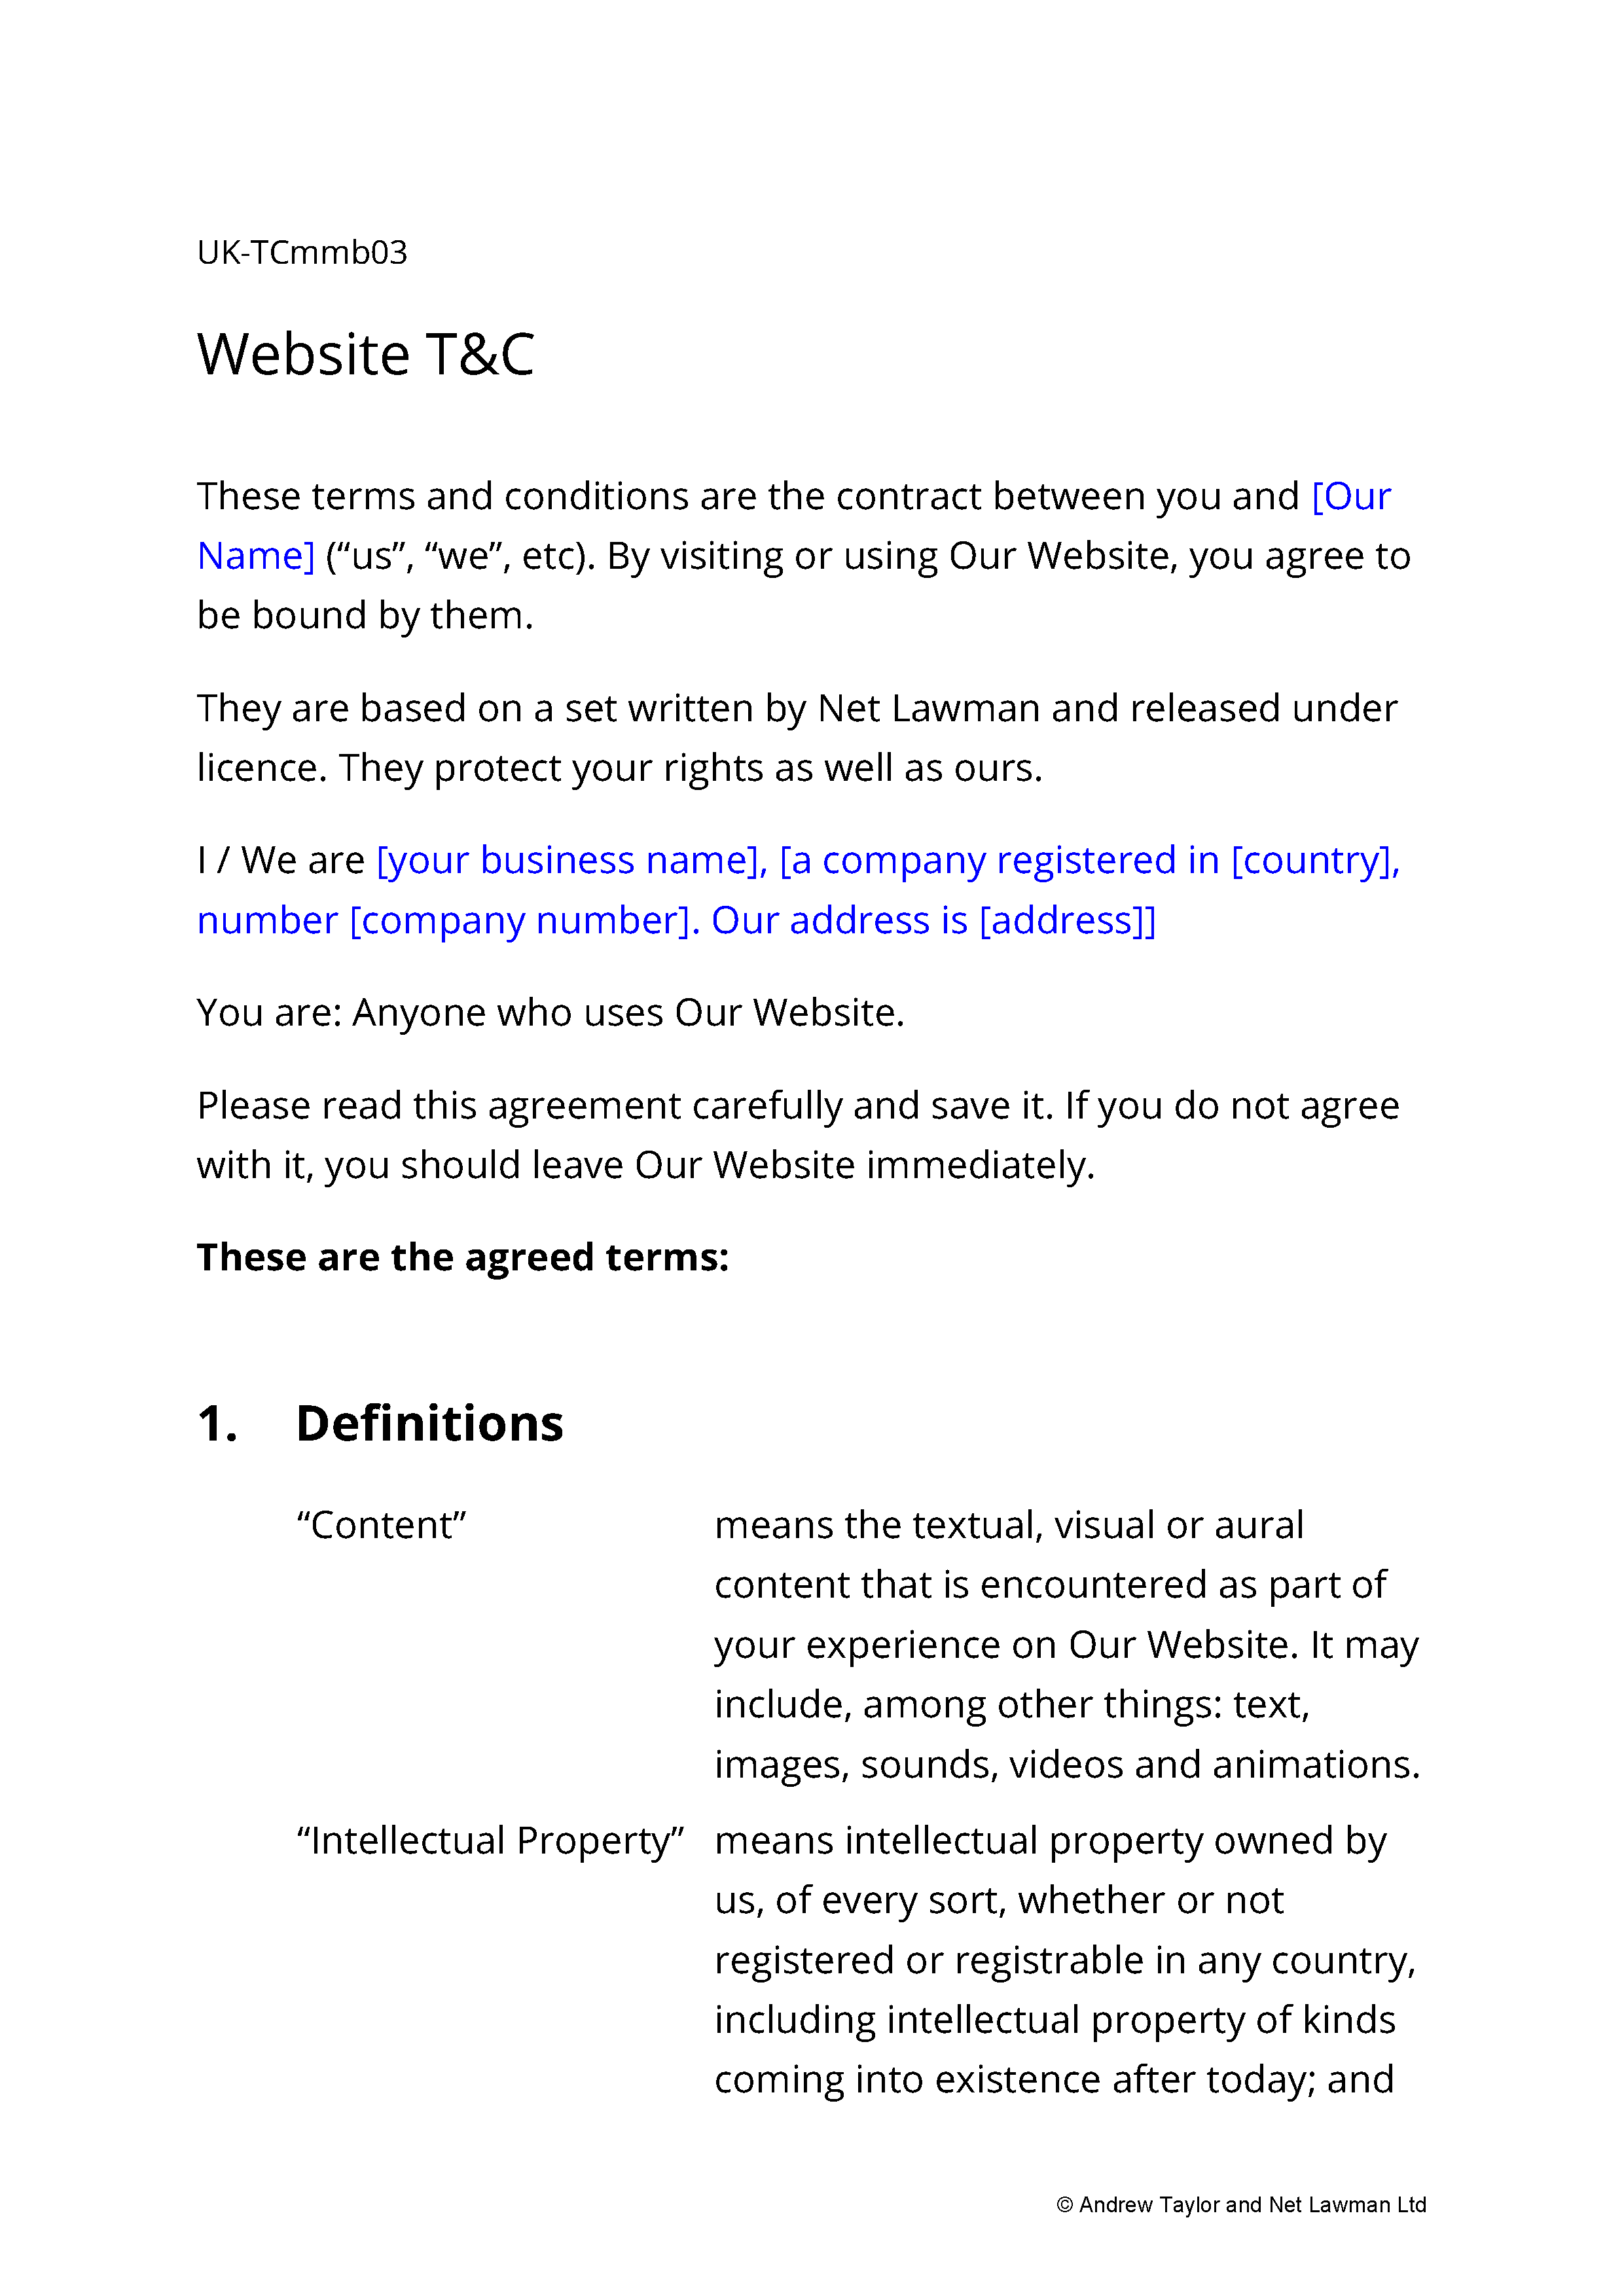 Sample page from the website terms for a club